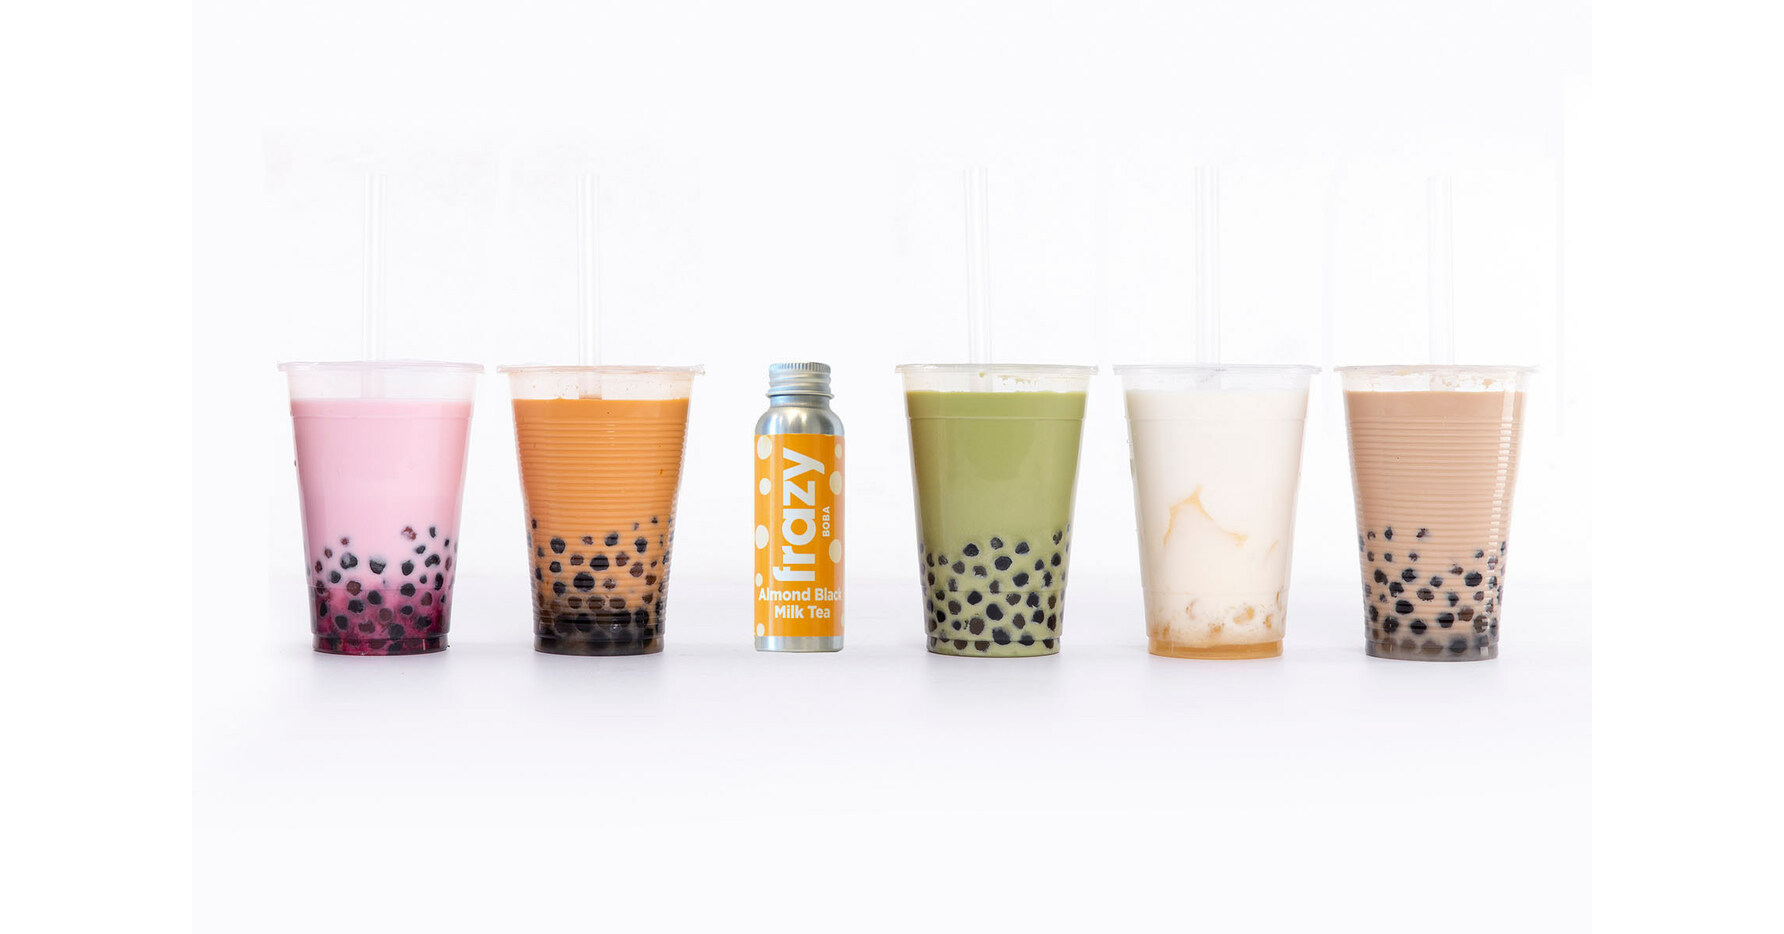 The bubble tea trend is on the rise. Here's where you can get this